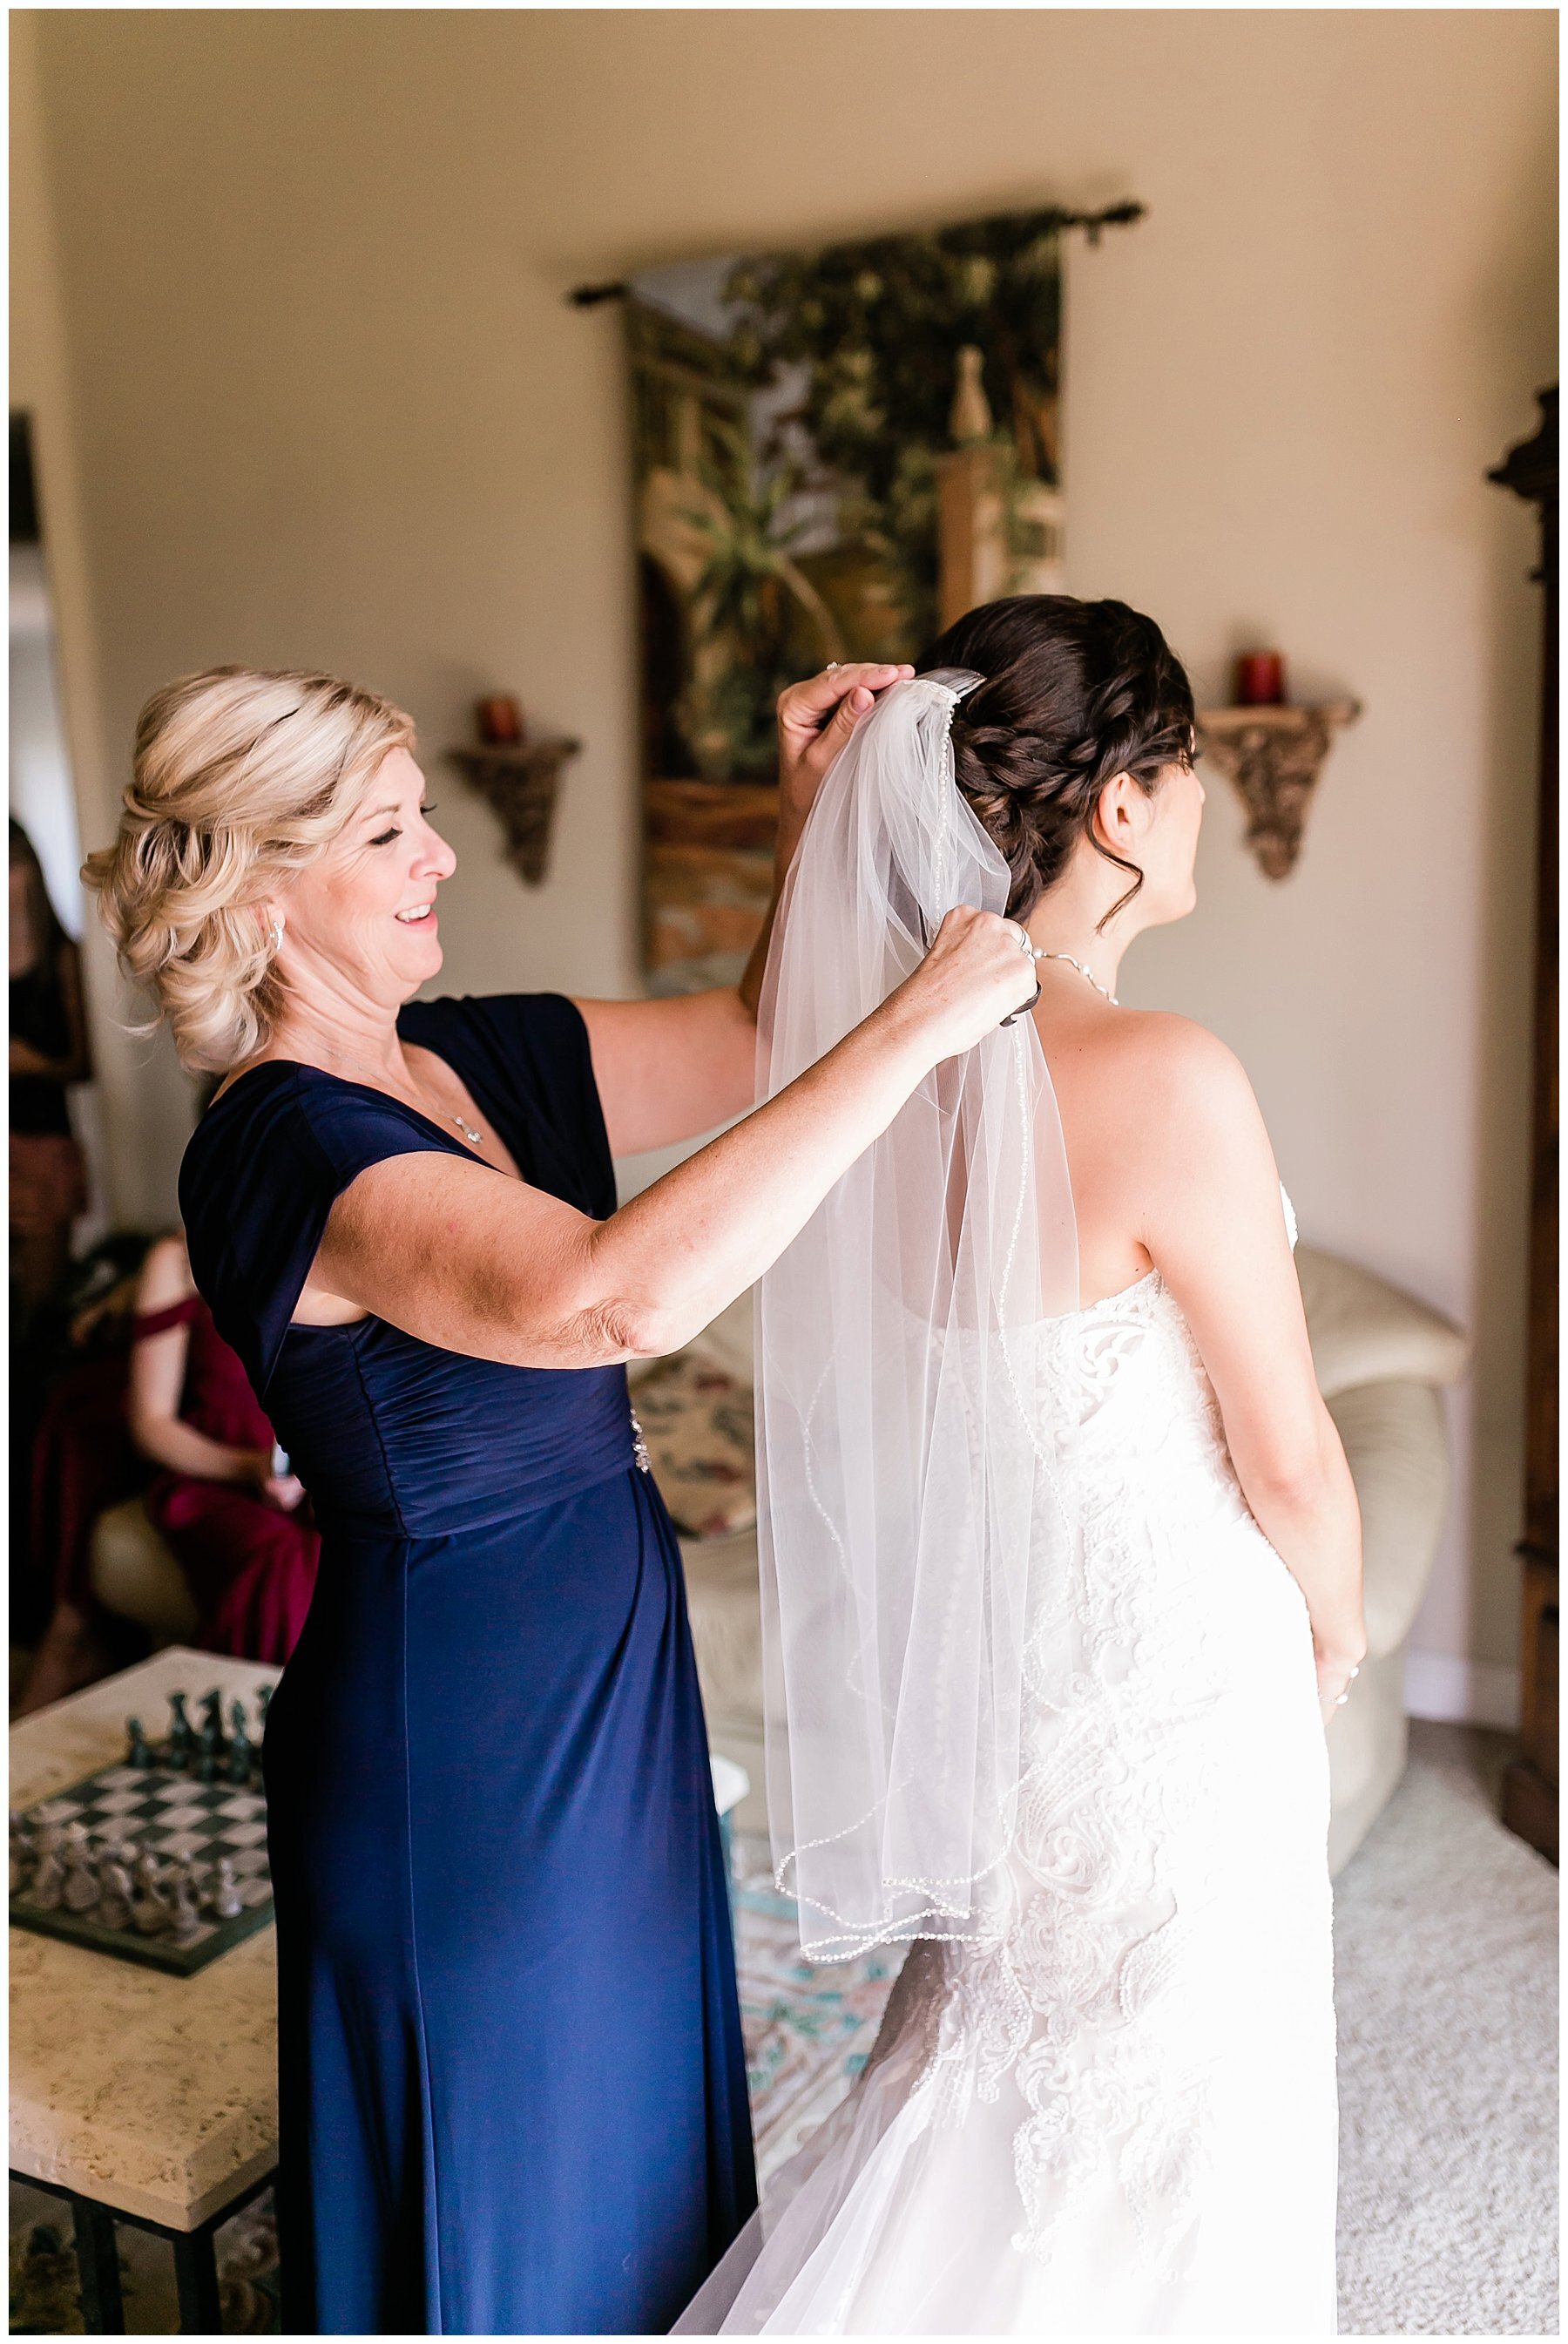  mother of the bride helping the bride get ready 